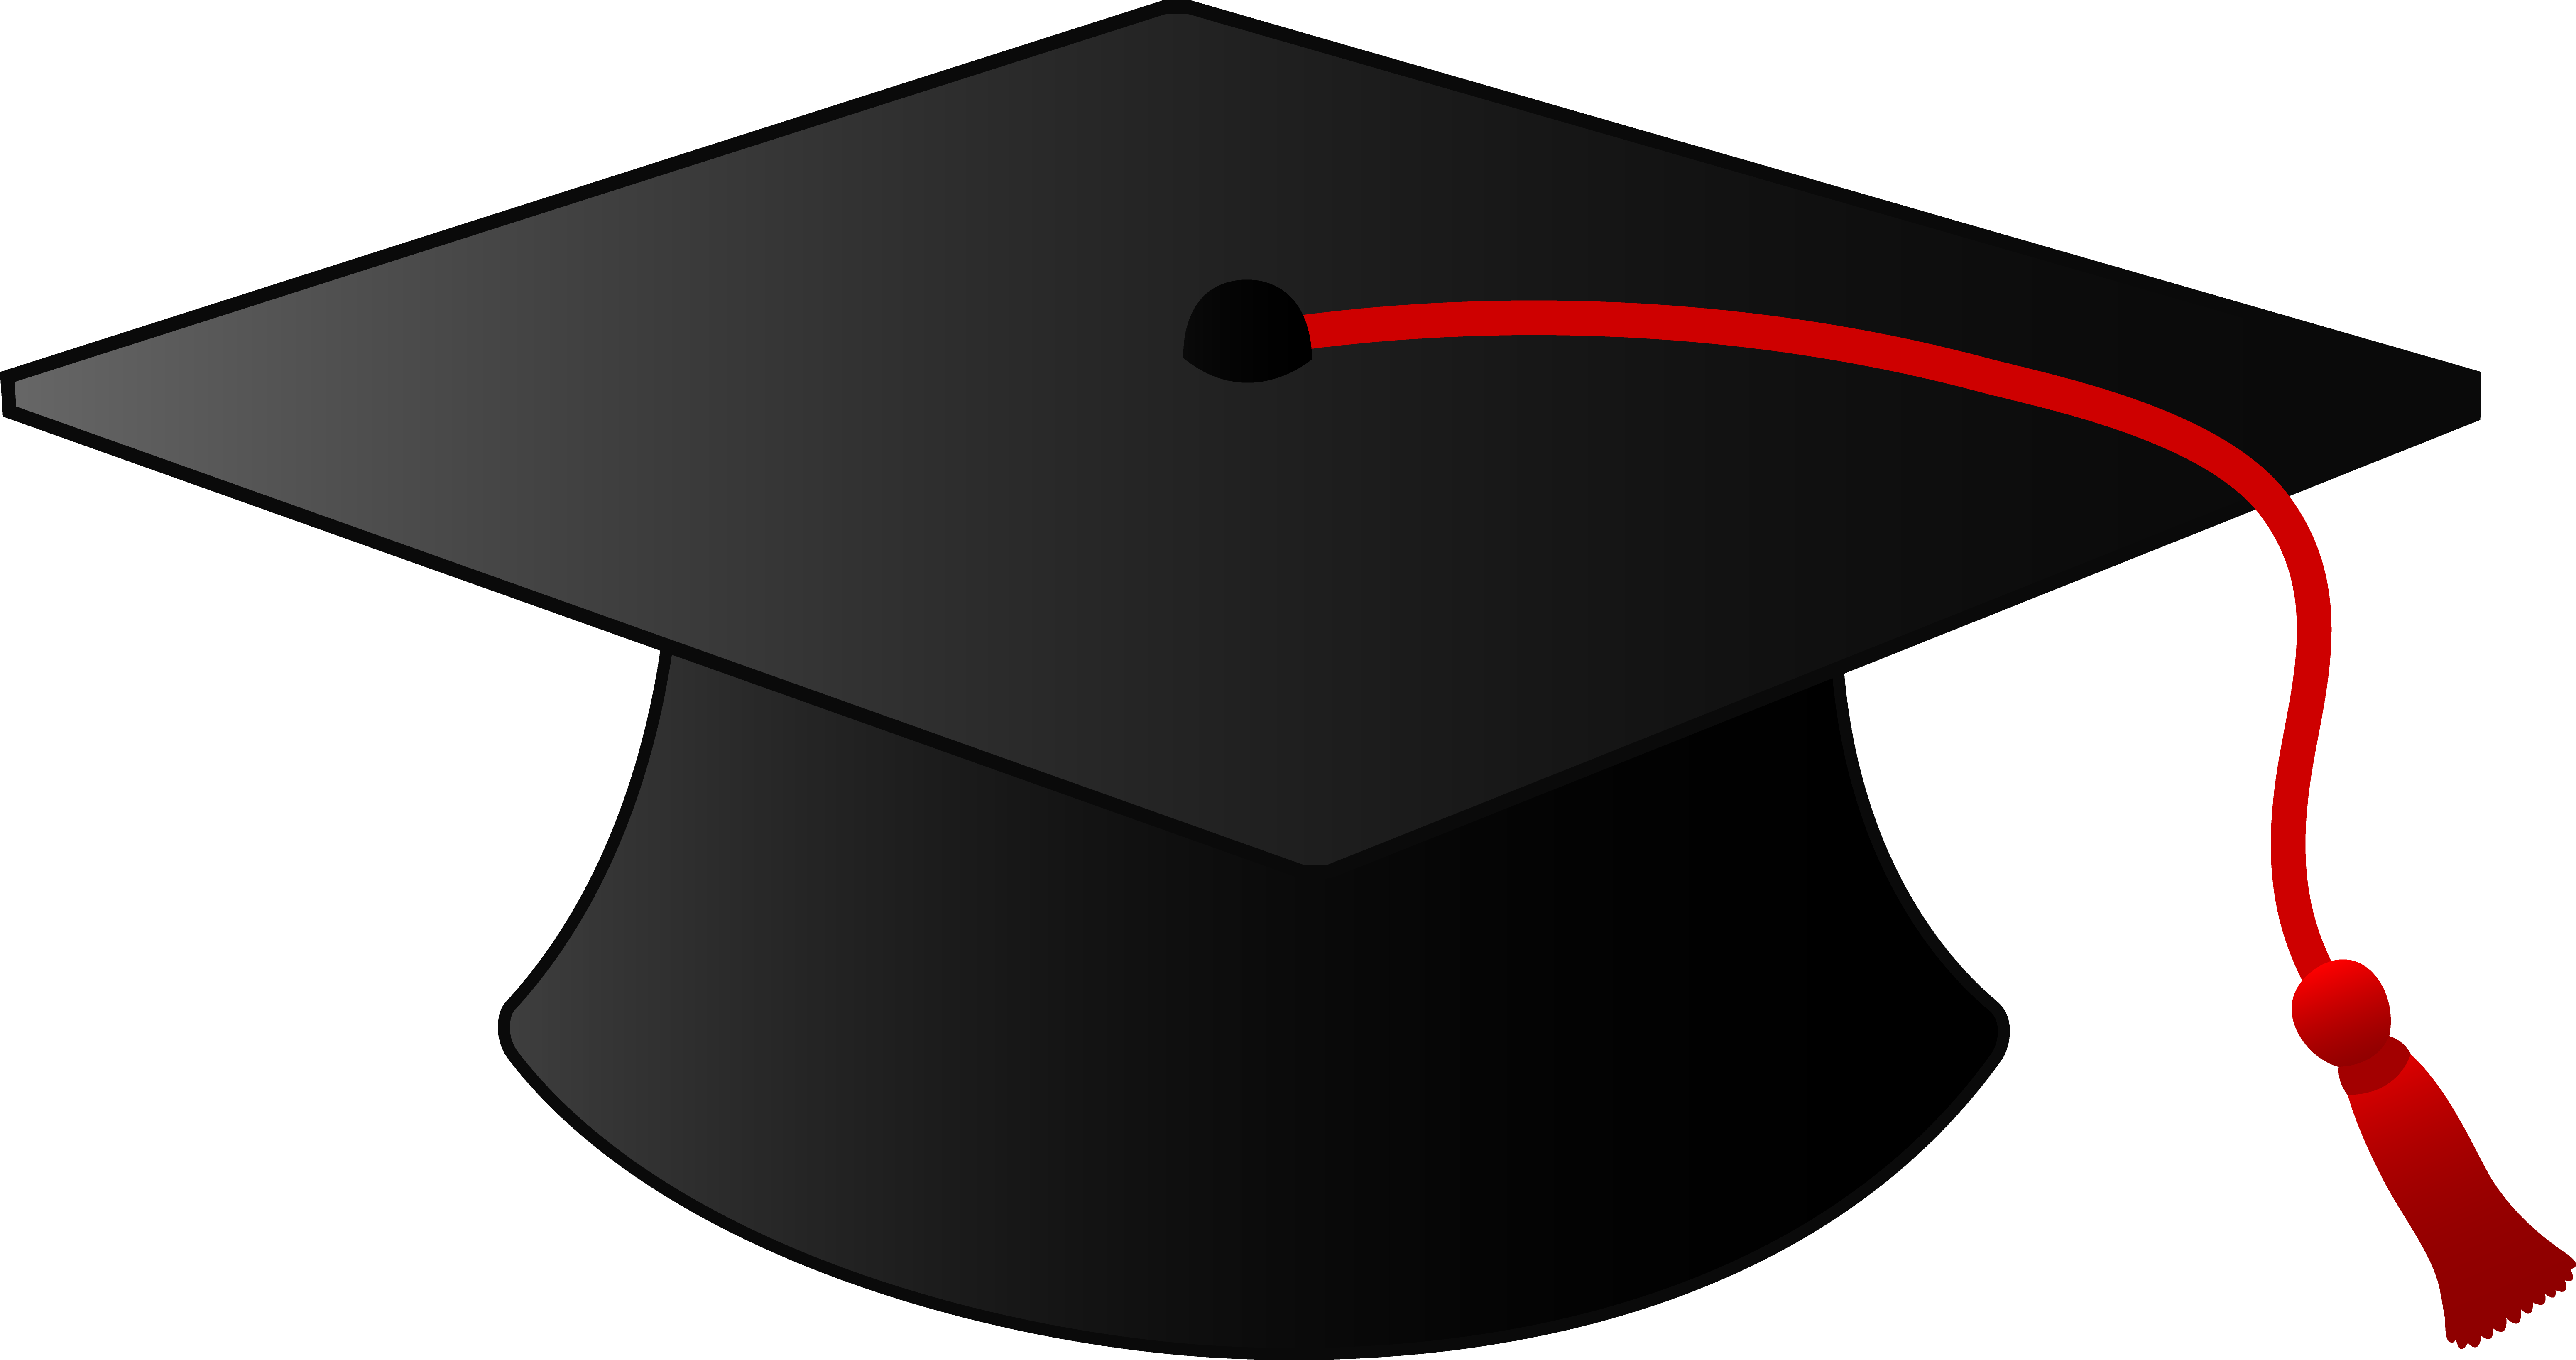 Cap And Gown Png - ClipArt Best